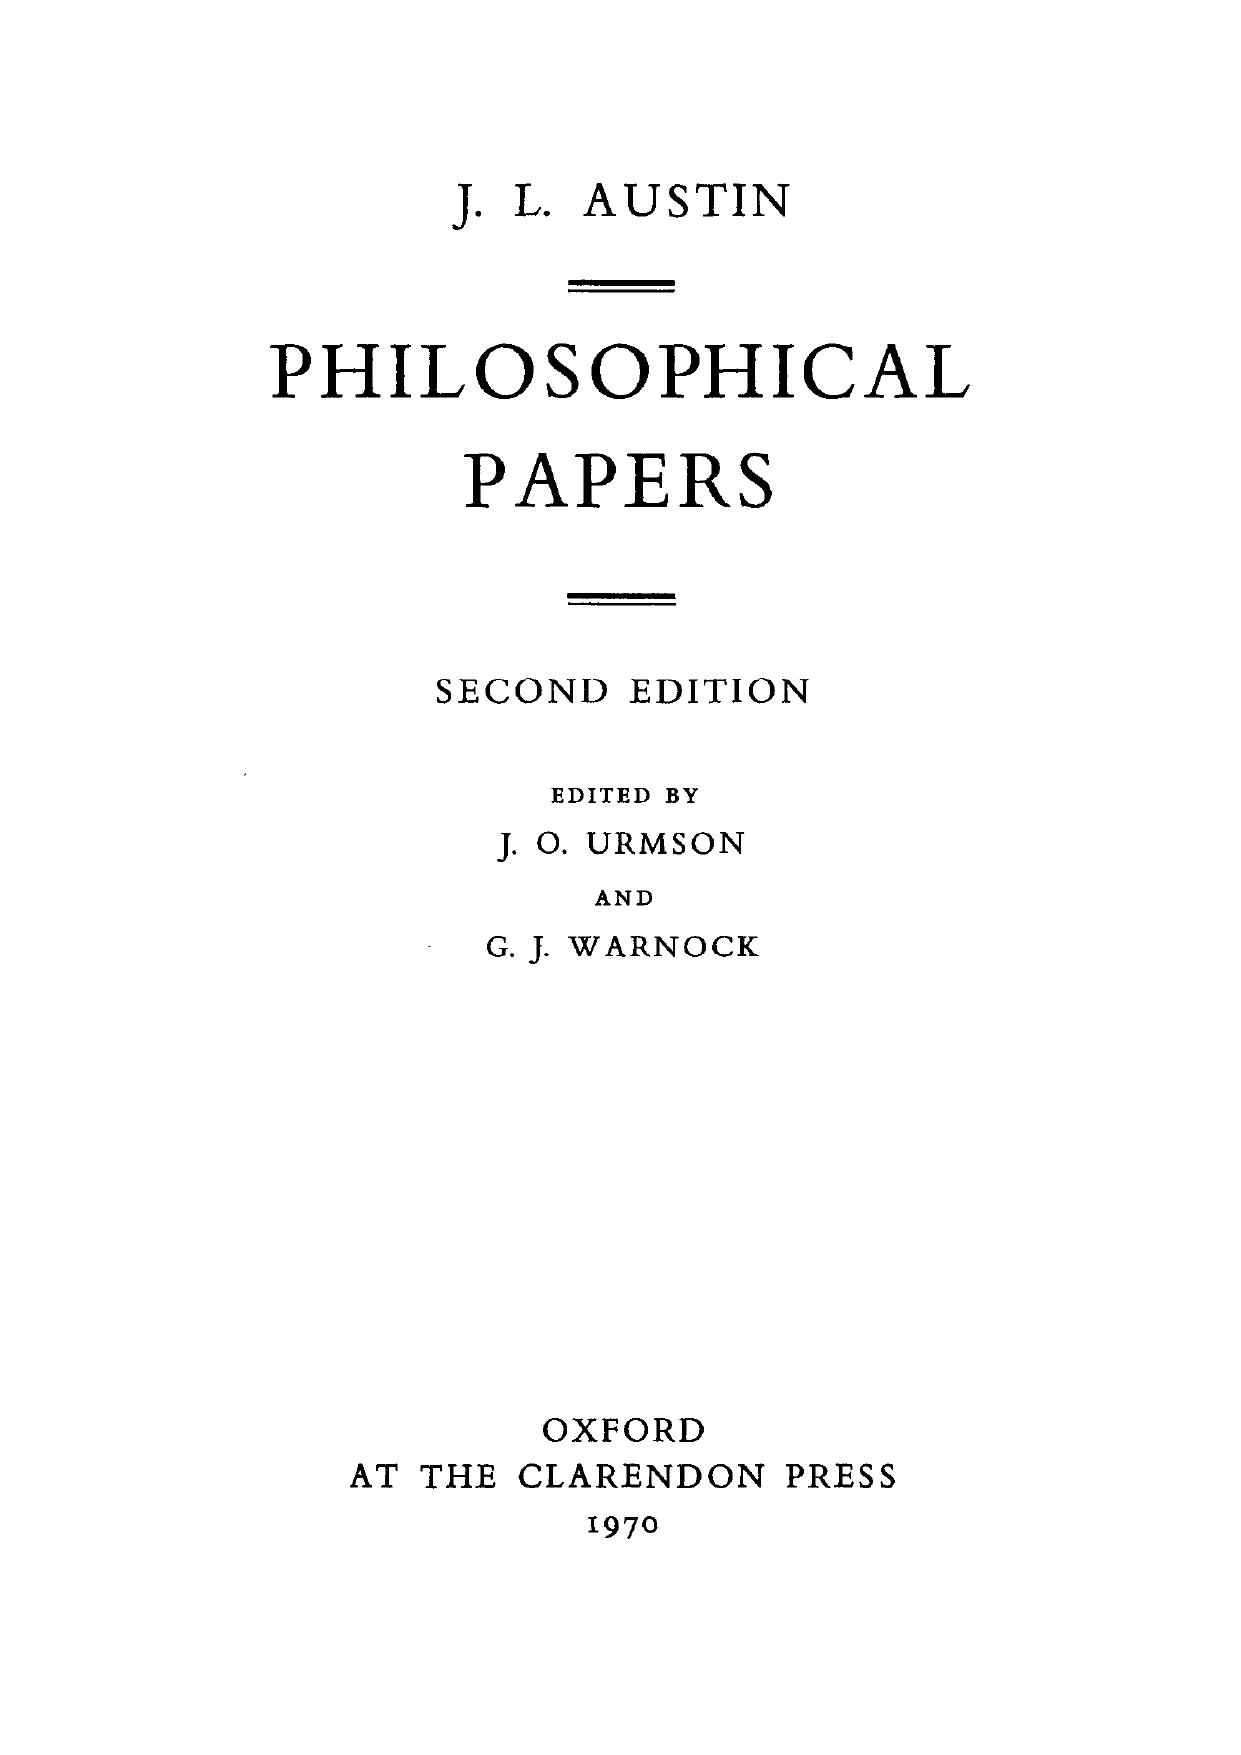 Philosophical Papers - 2nd. Ed.